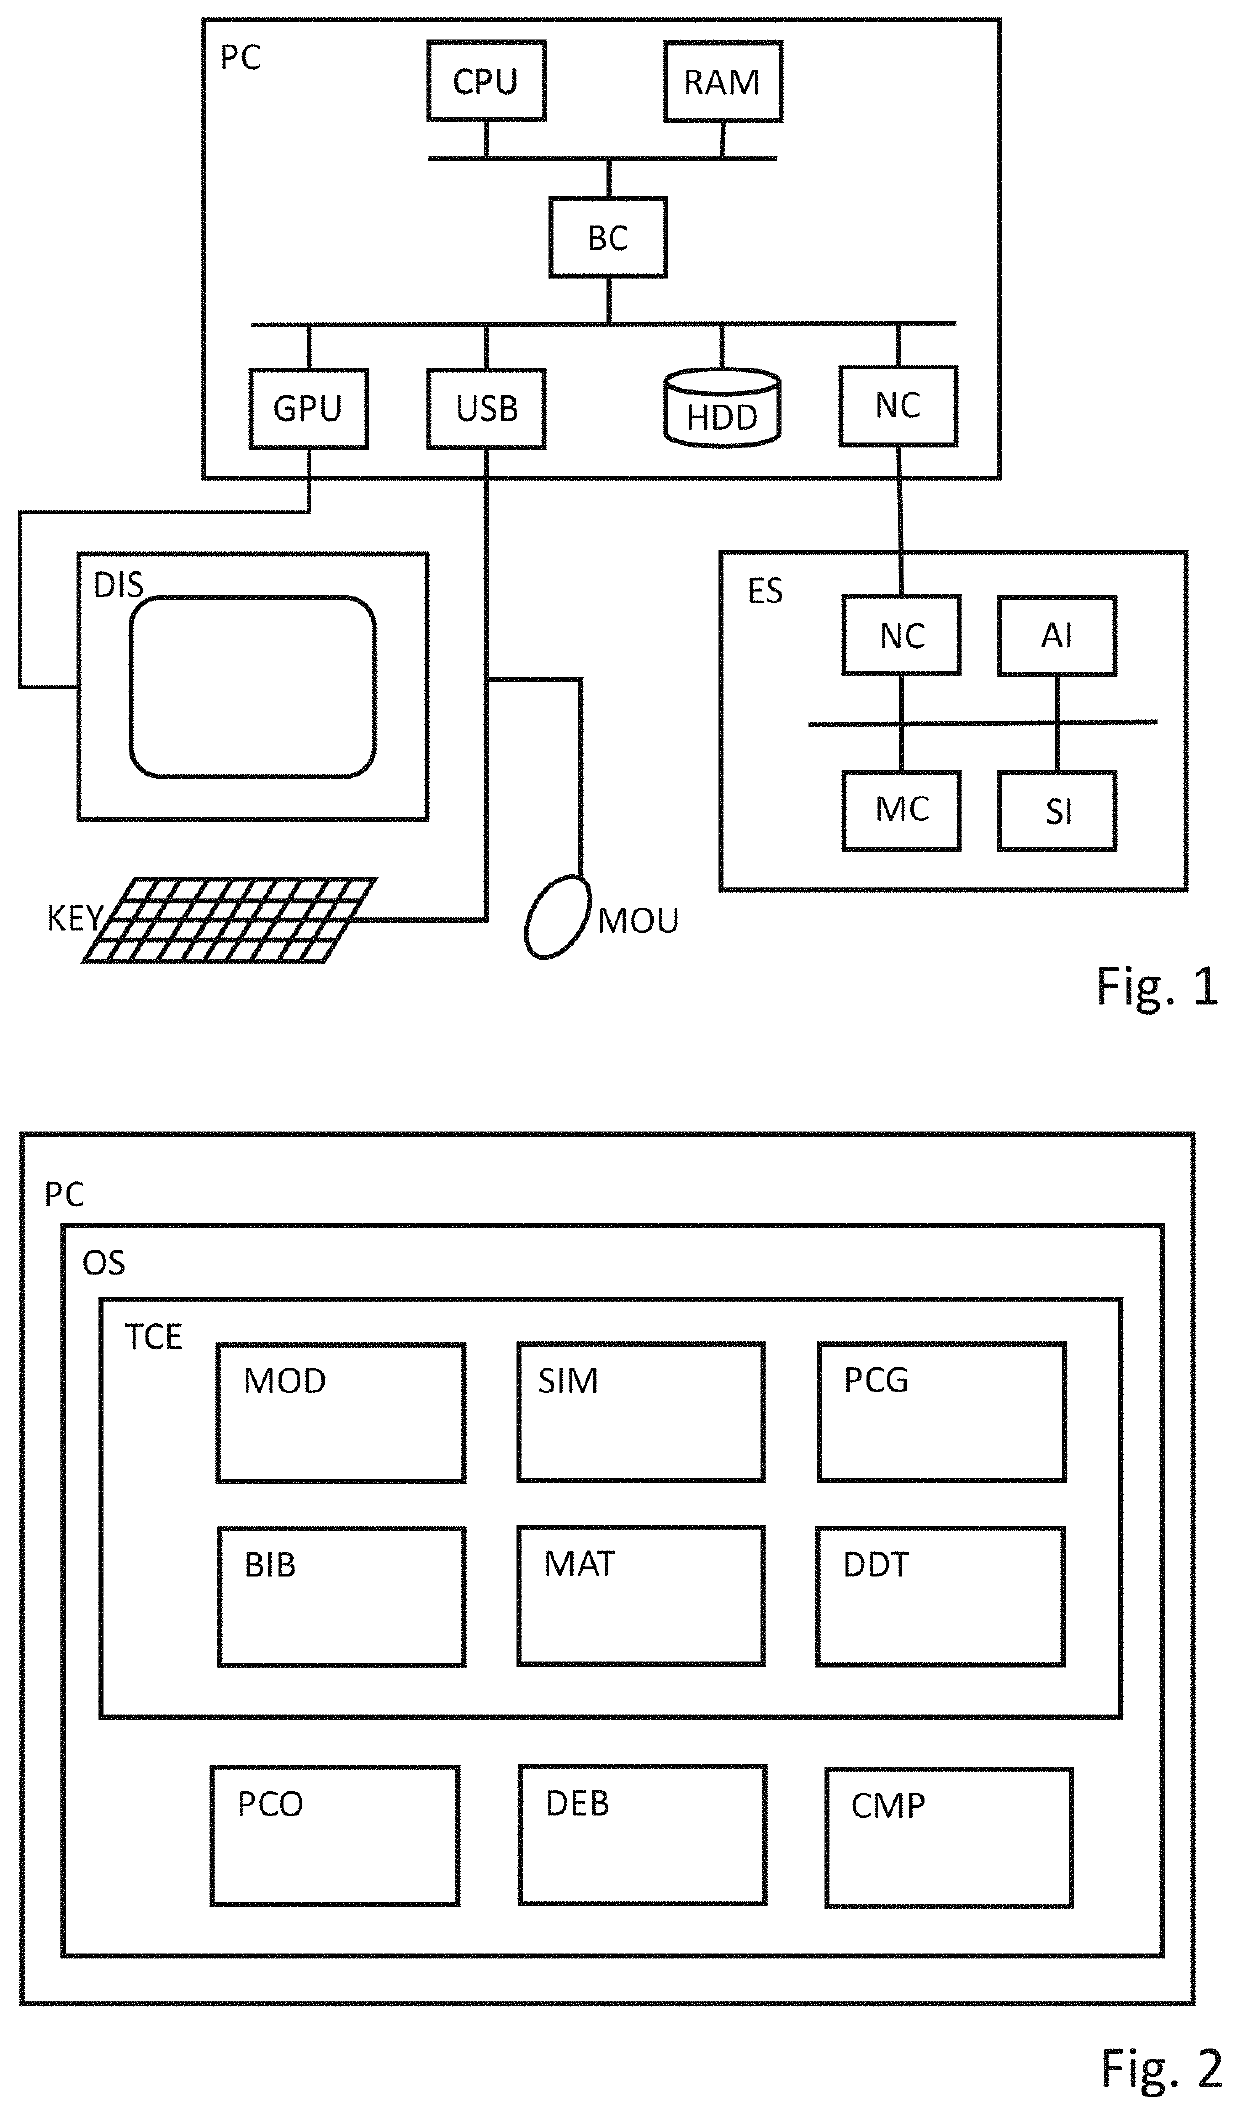 Method and system for preparing block diagrams for code generation